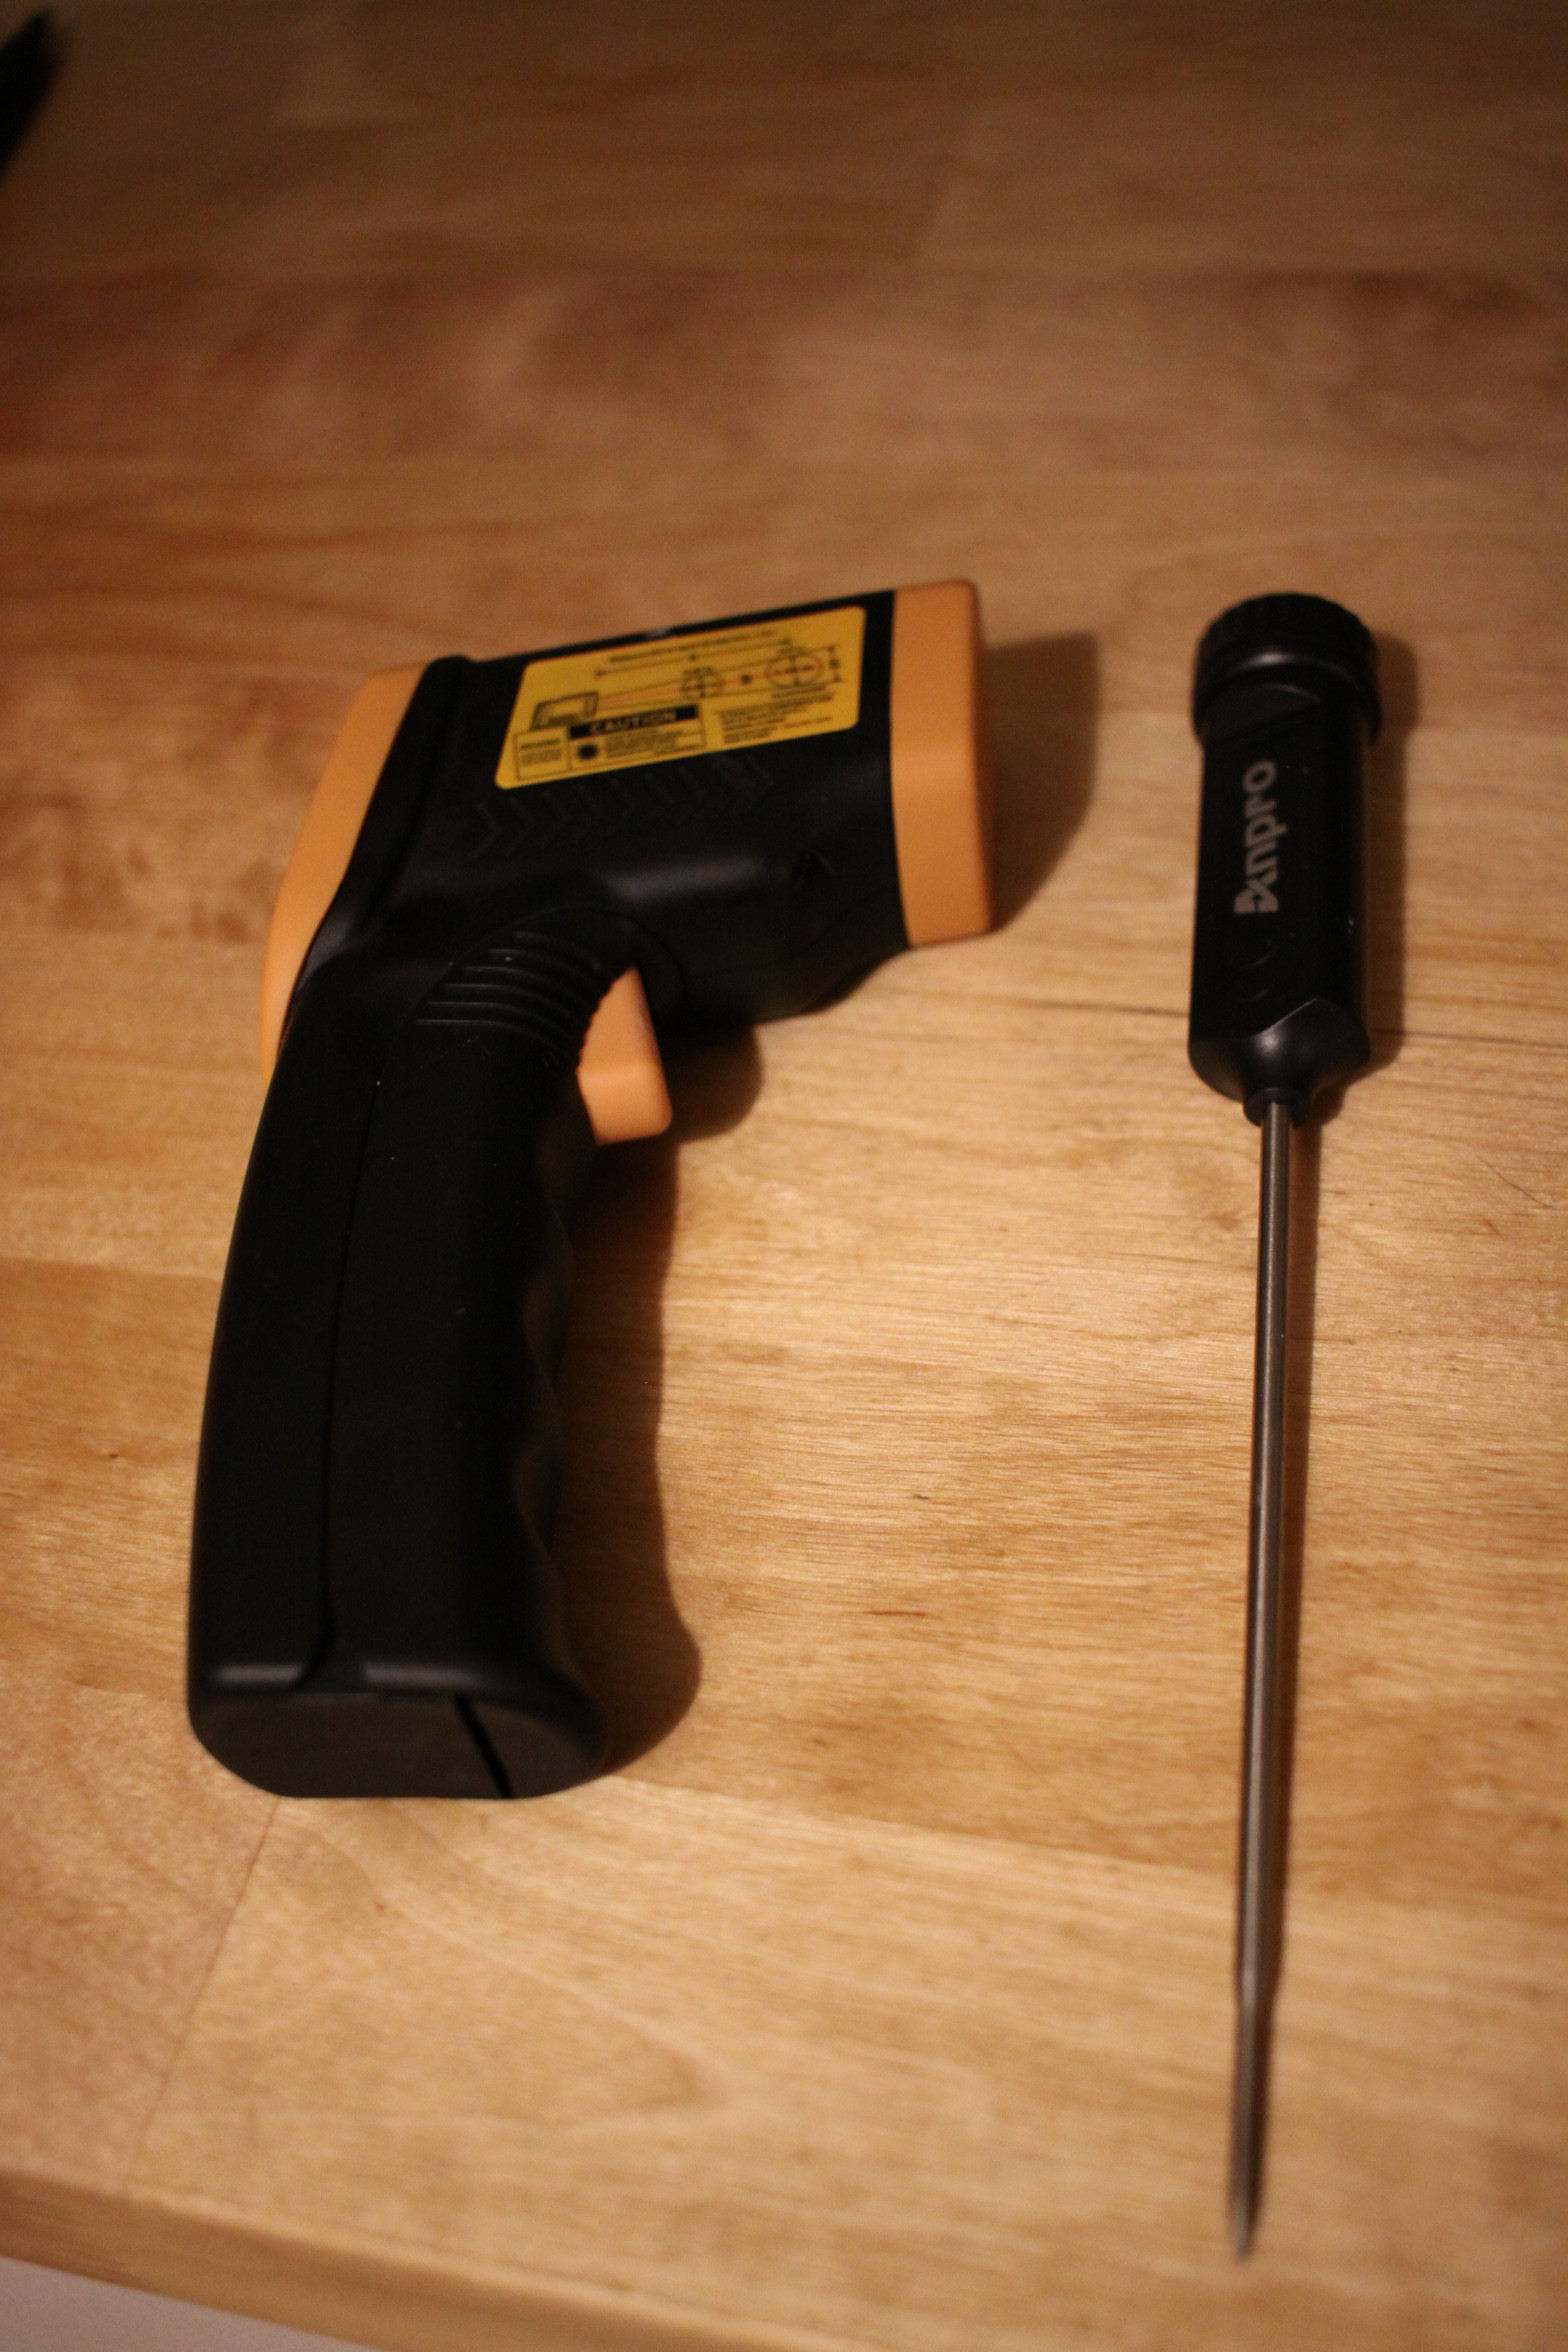 Regular and Infrared Thermometers.